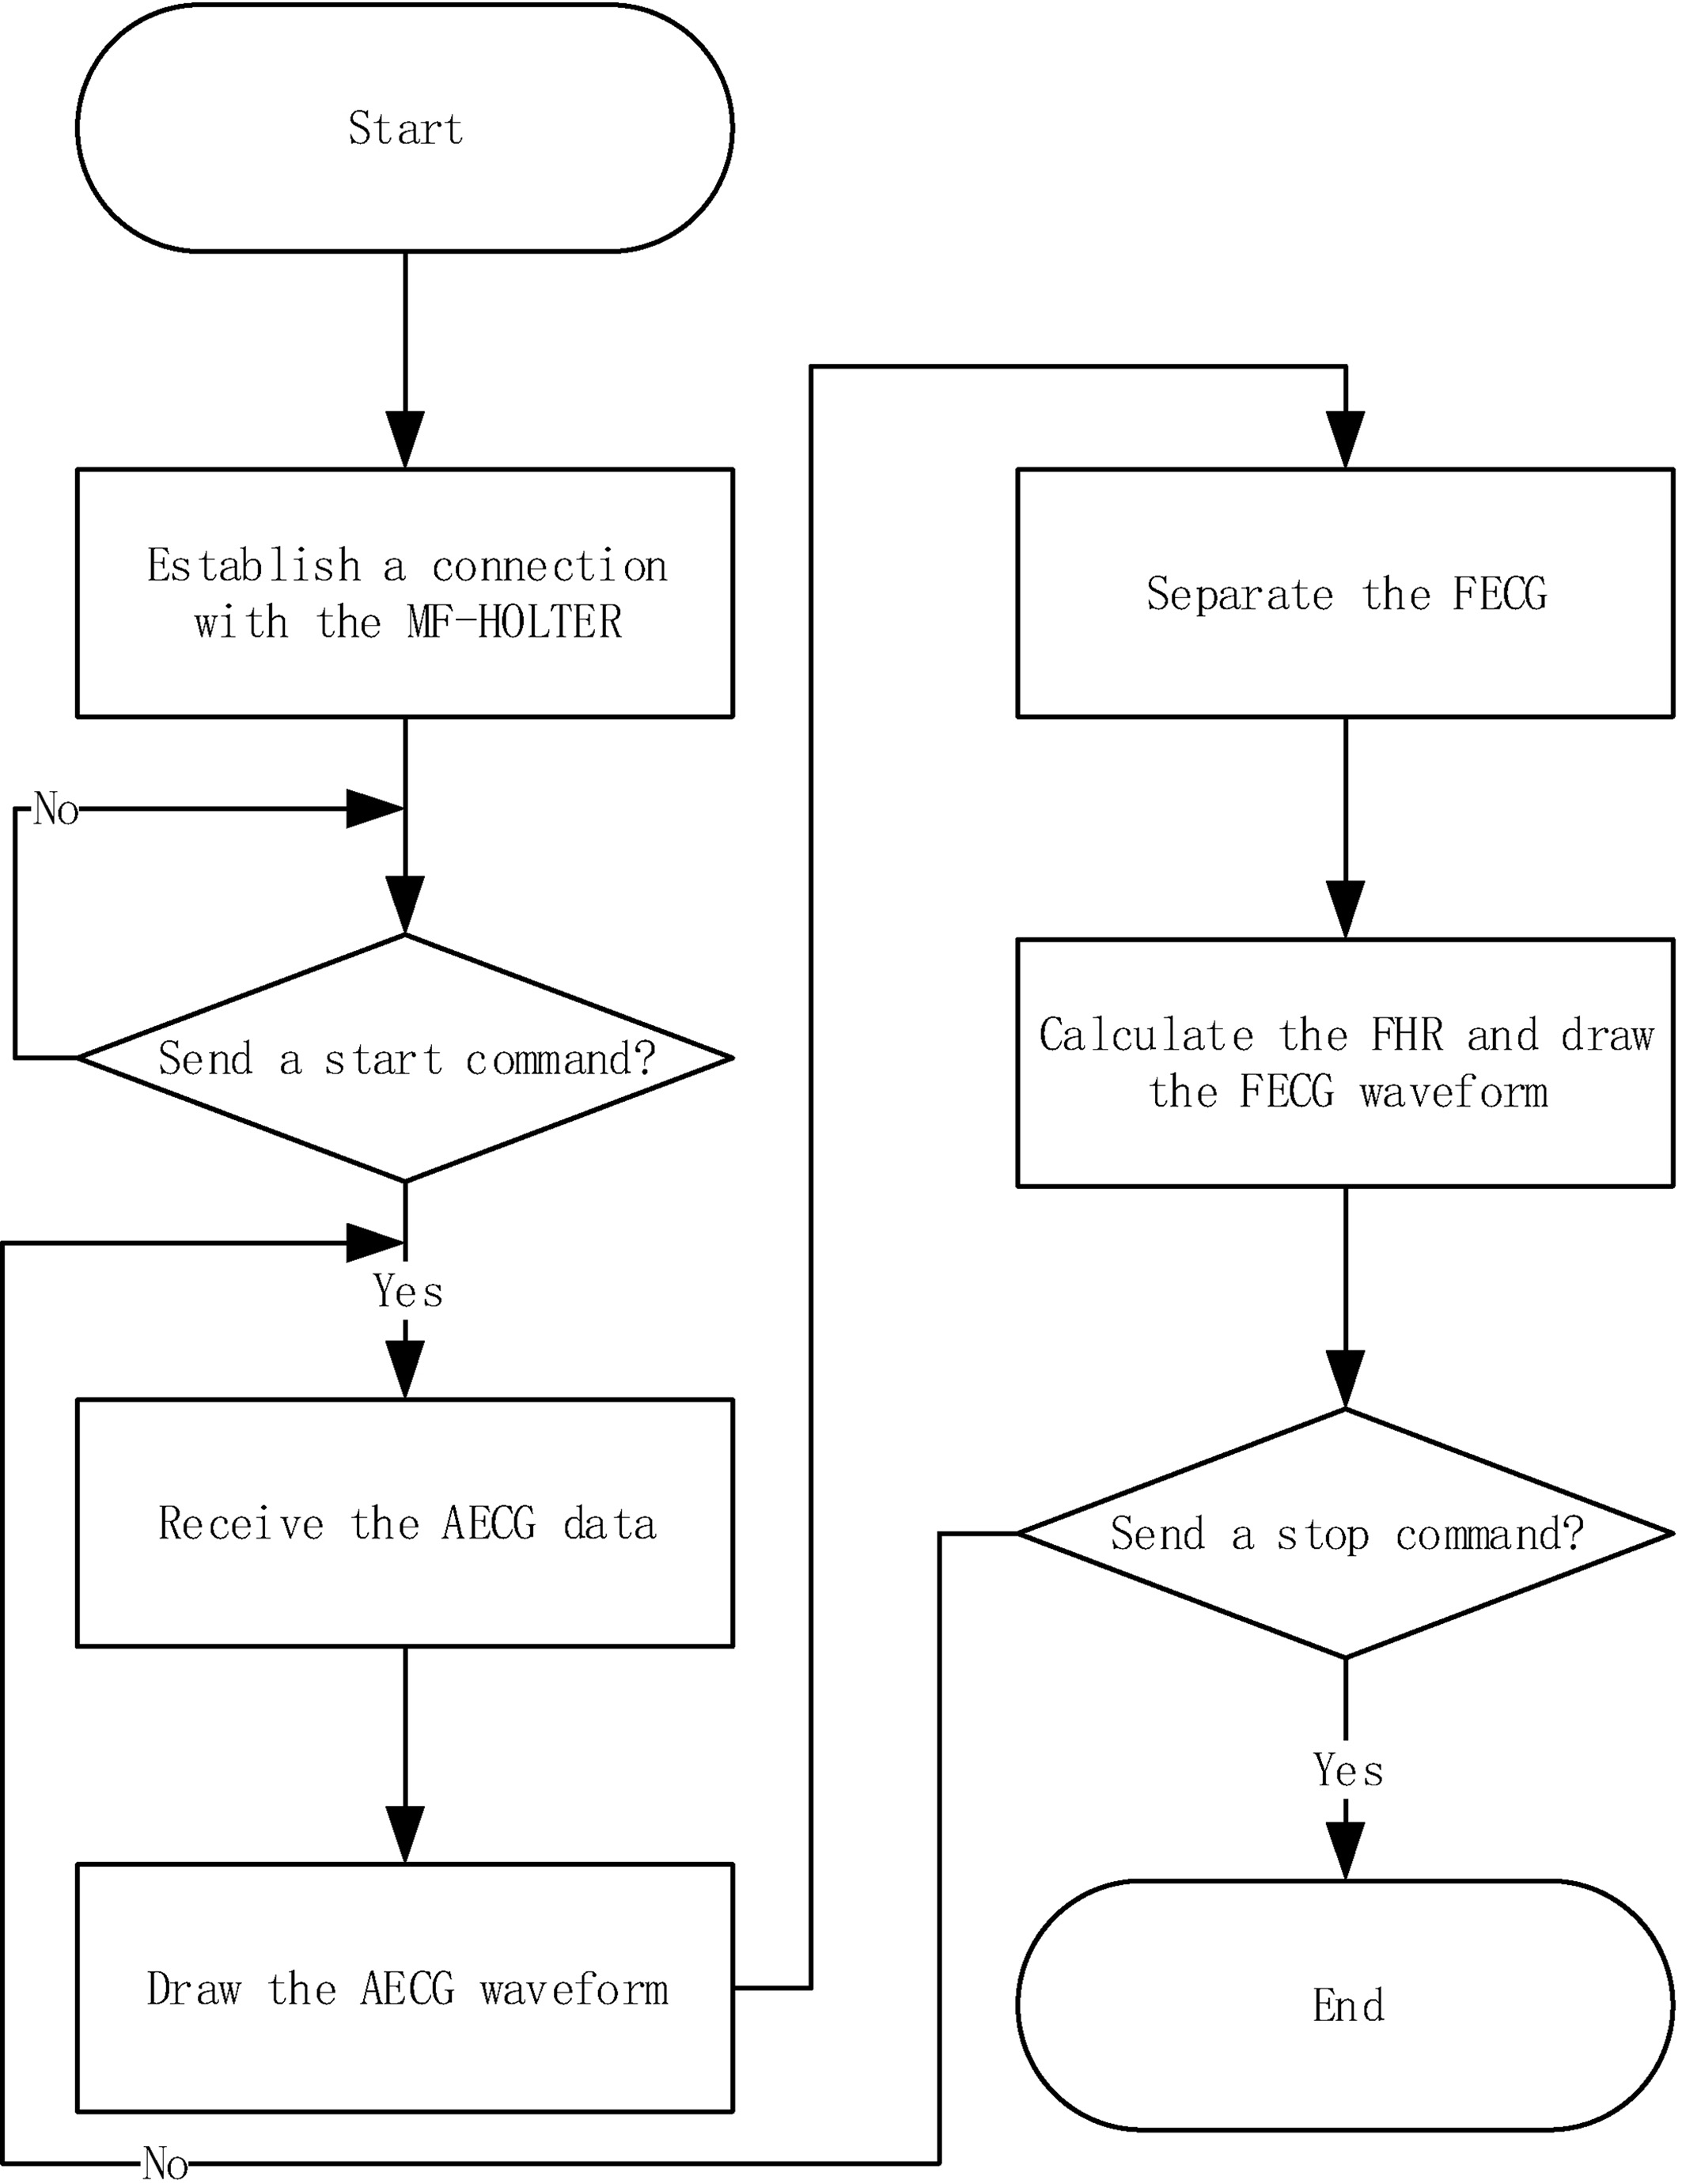 The flowchart of the FECG-MS.